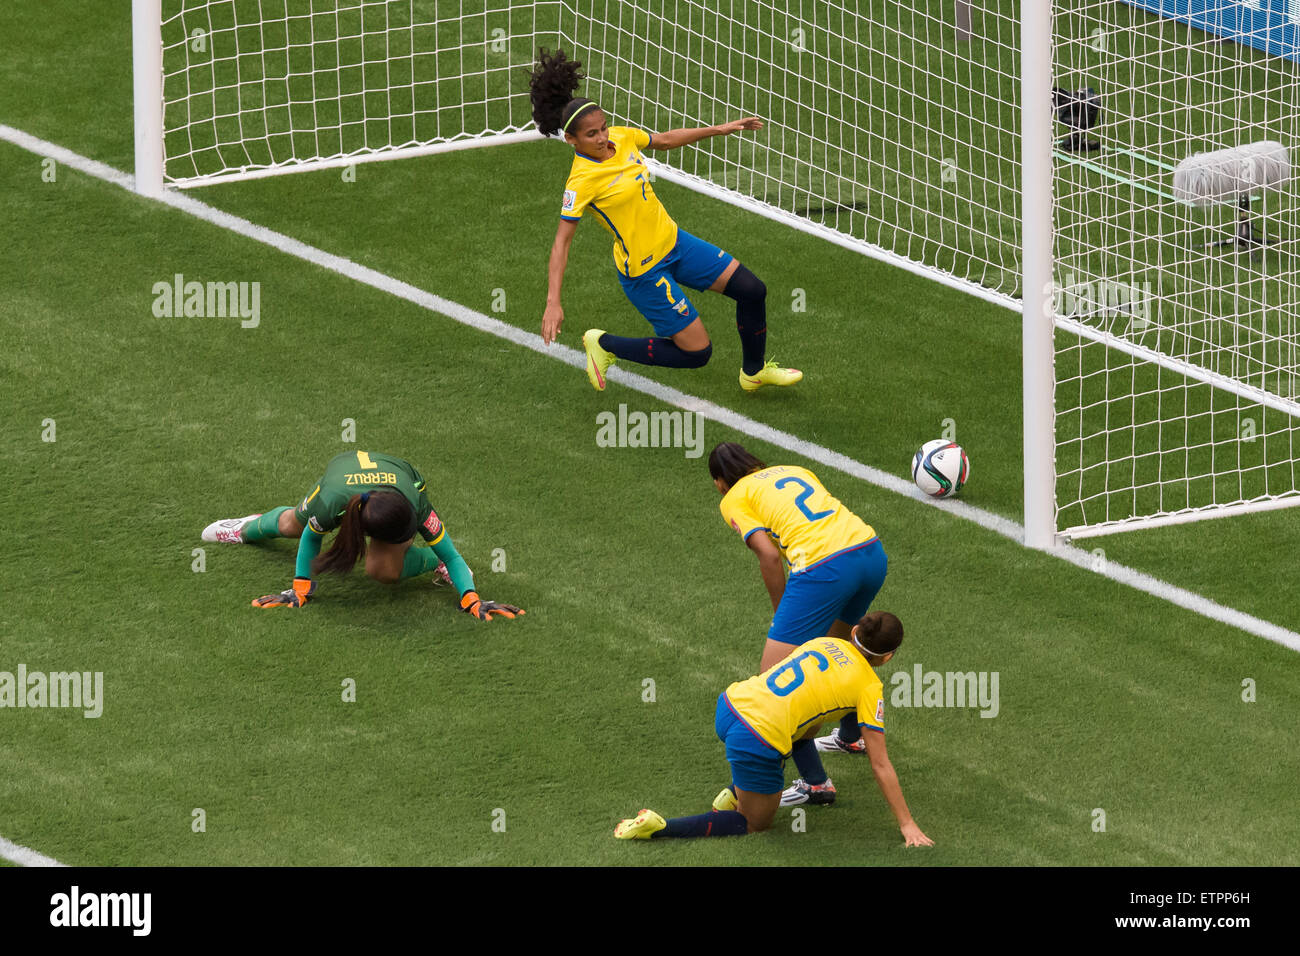 June 12, 2015: Angie PONCE of Ecuador scores an own goal during a Group C match at the FIFA Women's World Cup Canada 2015 between Switzerland and Ecuador at BC Place Stadium on 12 June 2015 in Vancouver, Canada. Switzerland won 10-1. Sydney Low/Cal Sport Media. Stock Photo